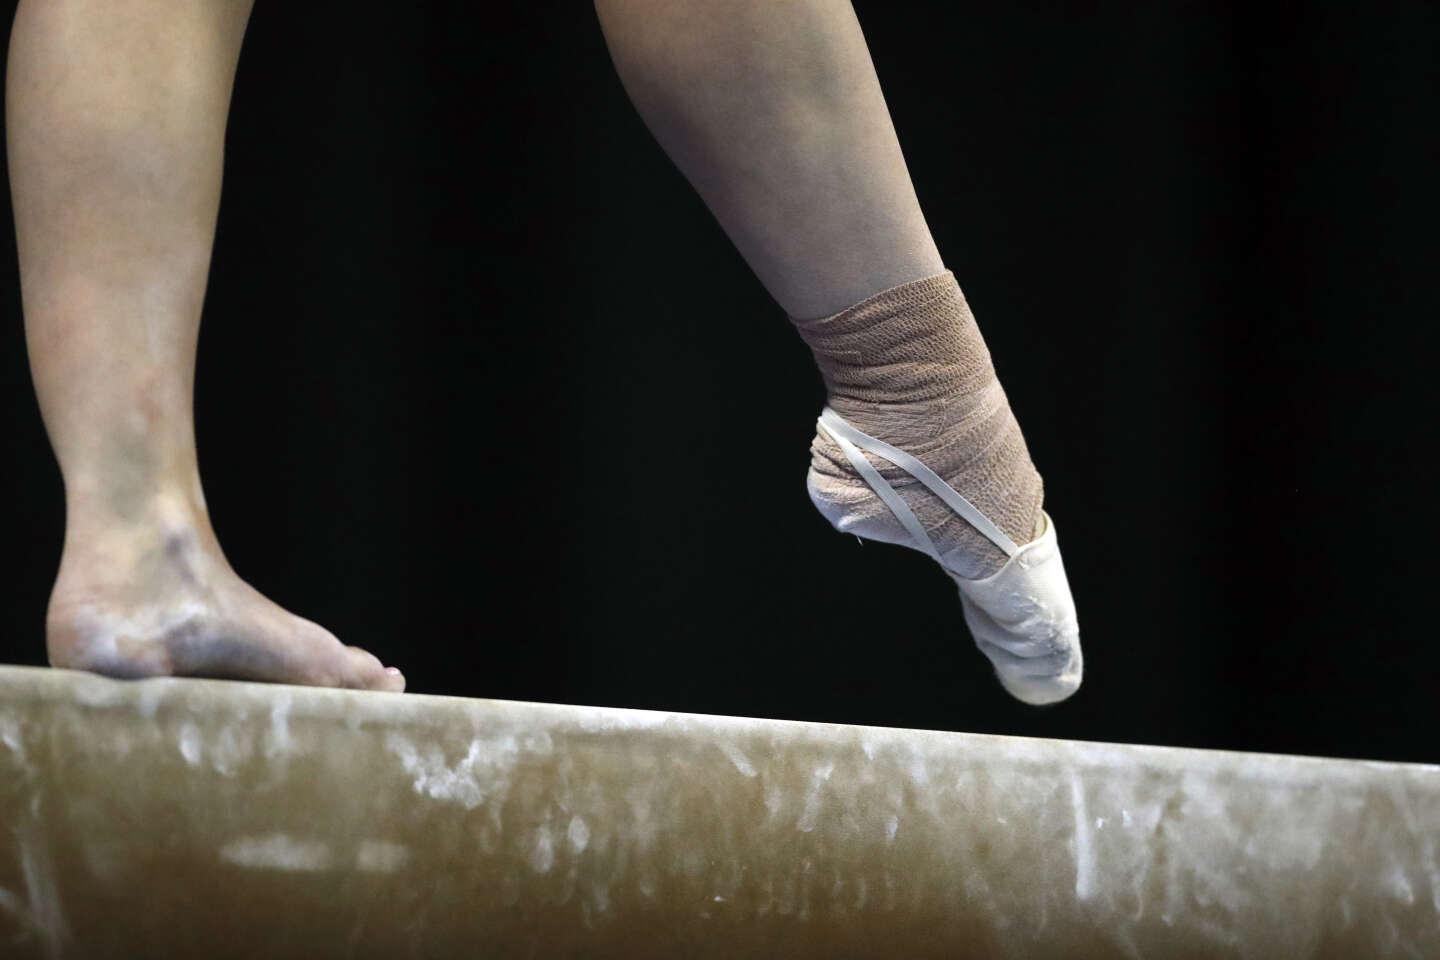 in Marseille, the trial of high-level gymnastics training methods